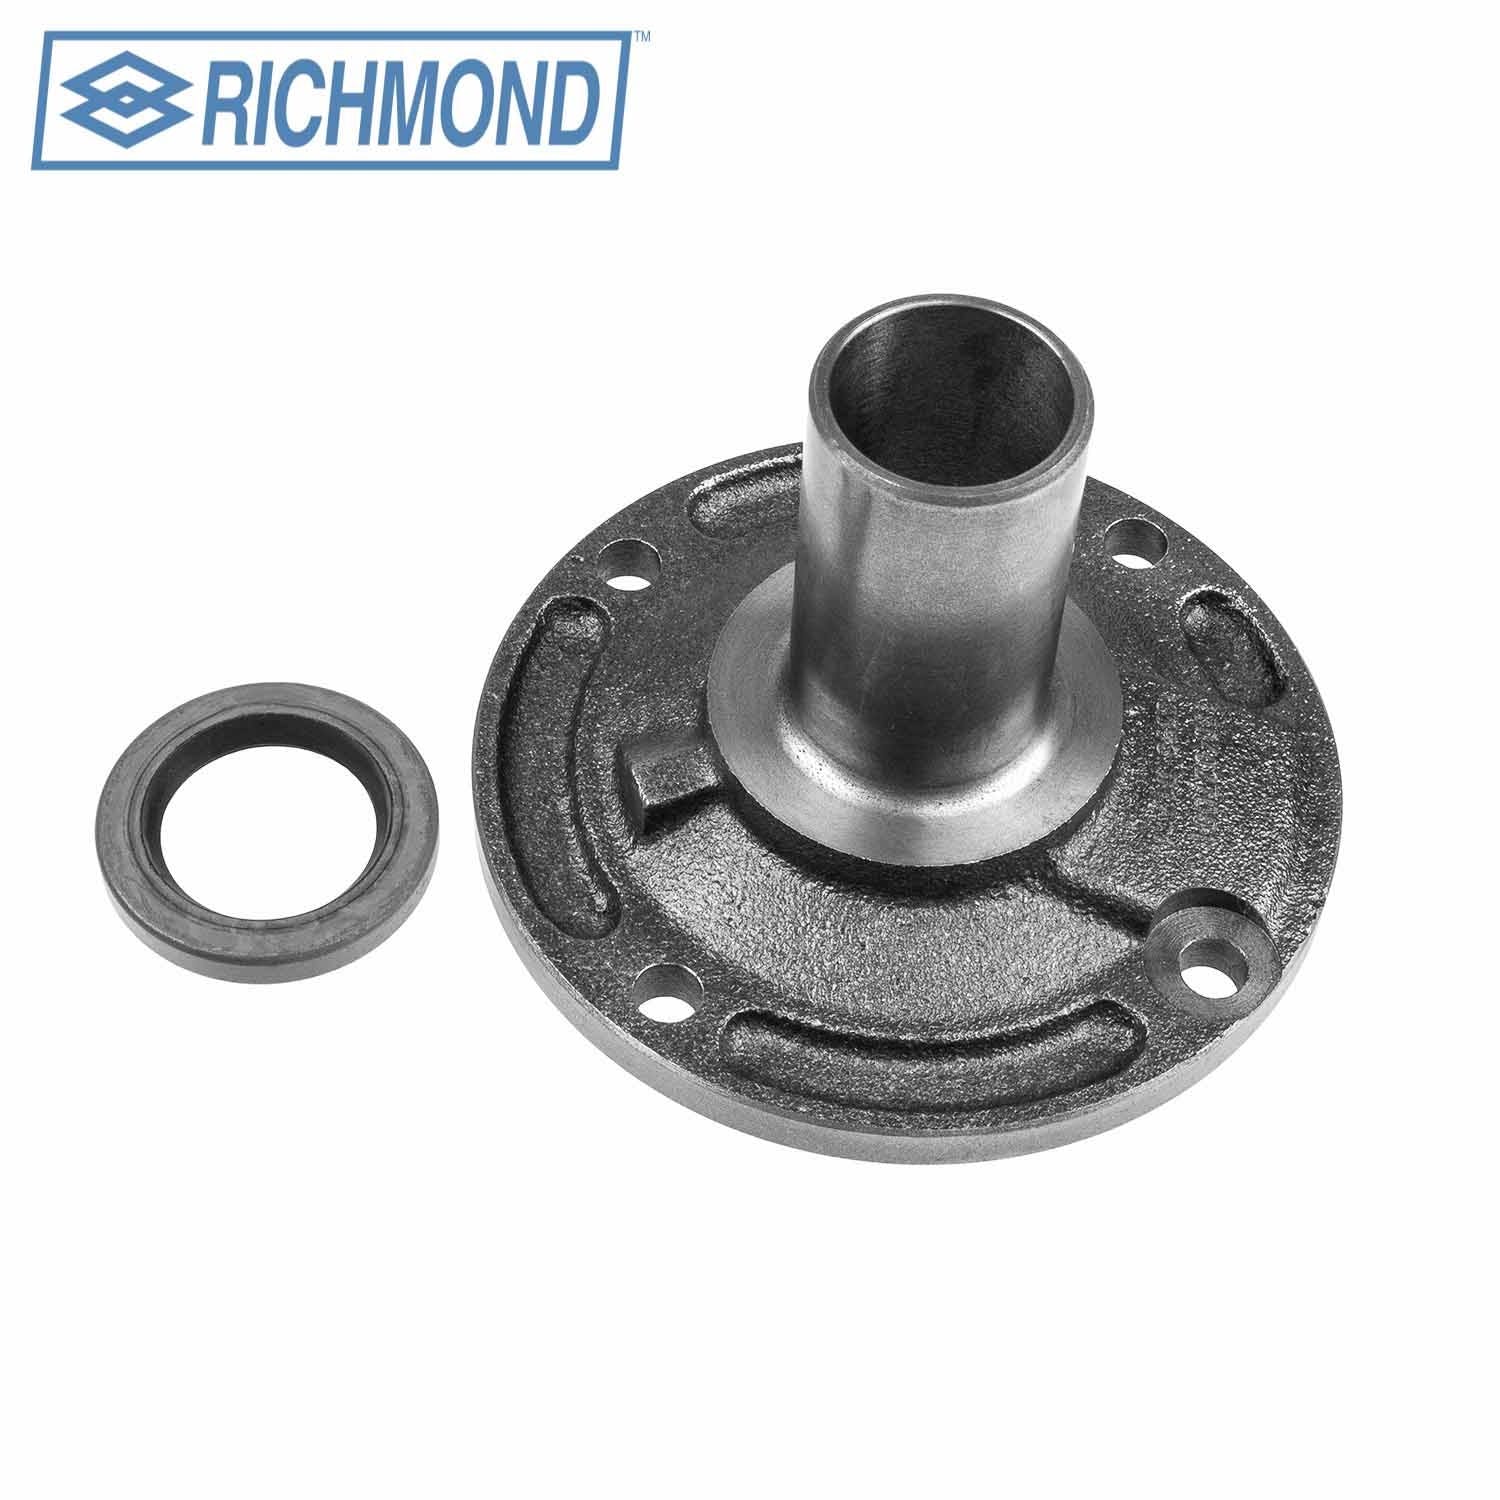 Richmond 8624911 Input Retainer GM with Seal, Cast